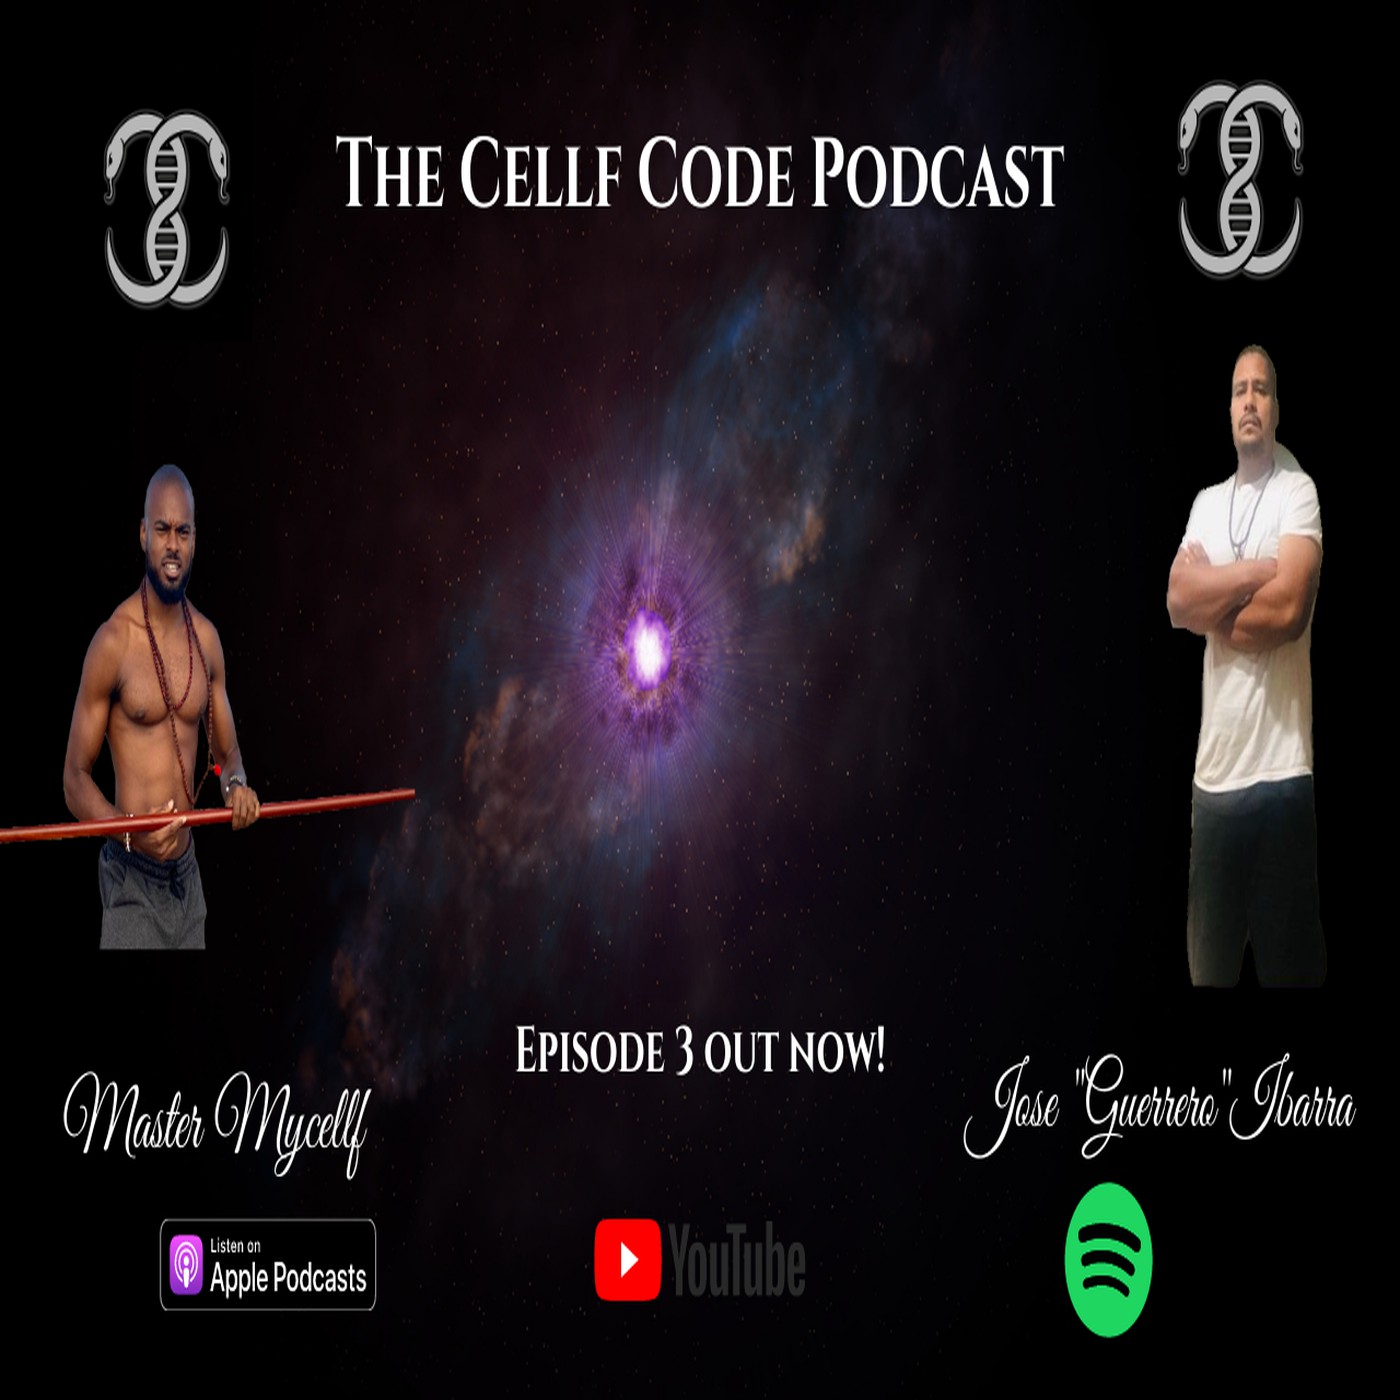 The Cellf Code Podcast